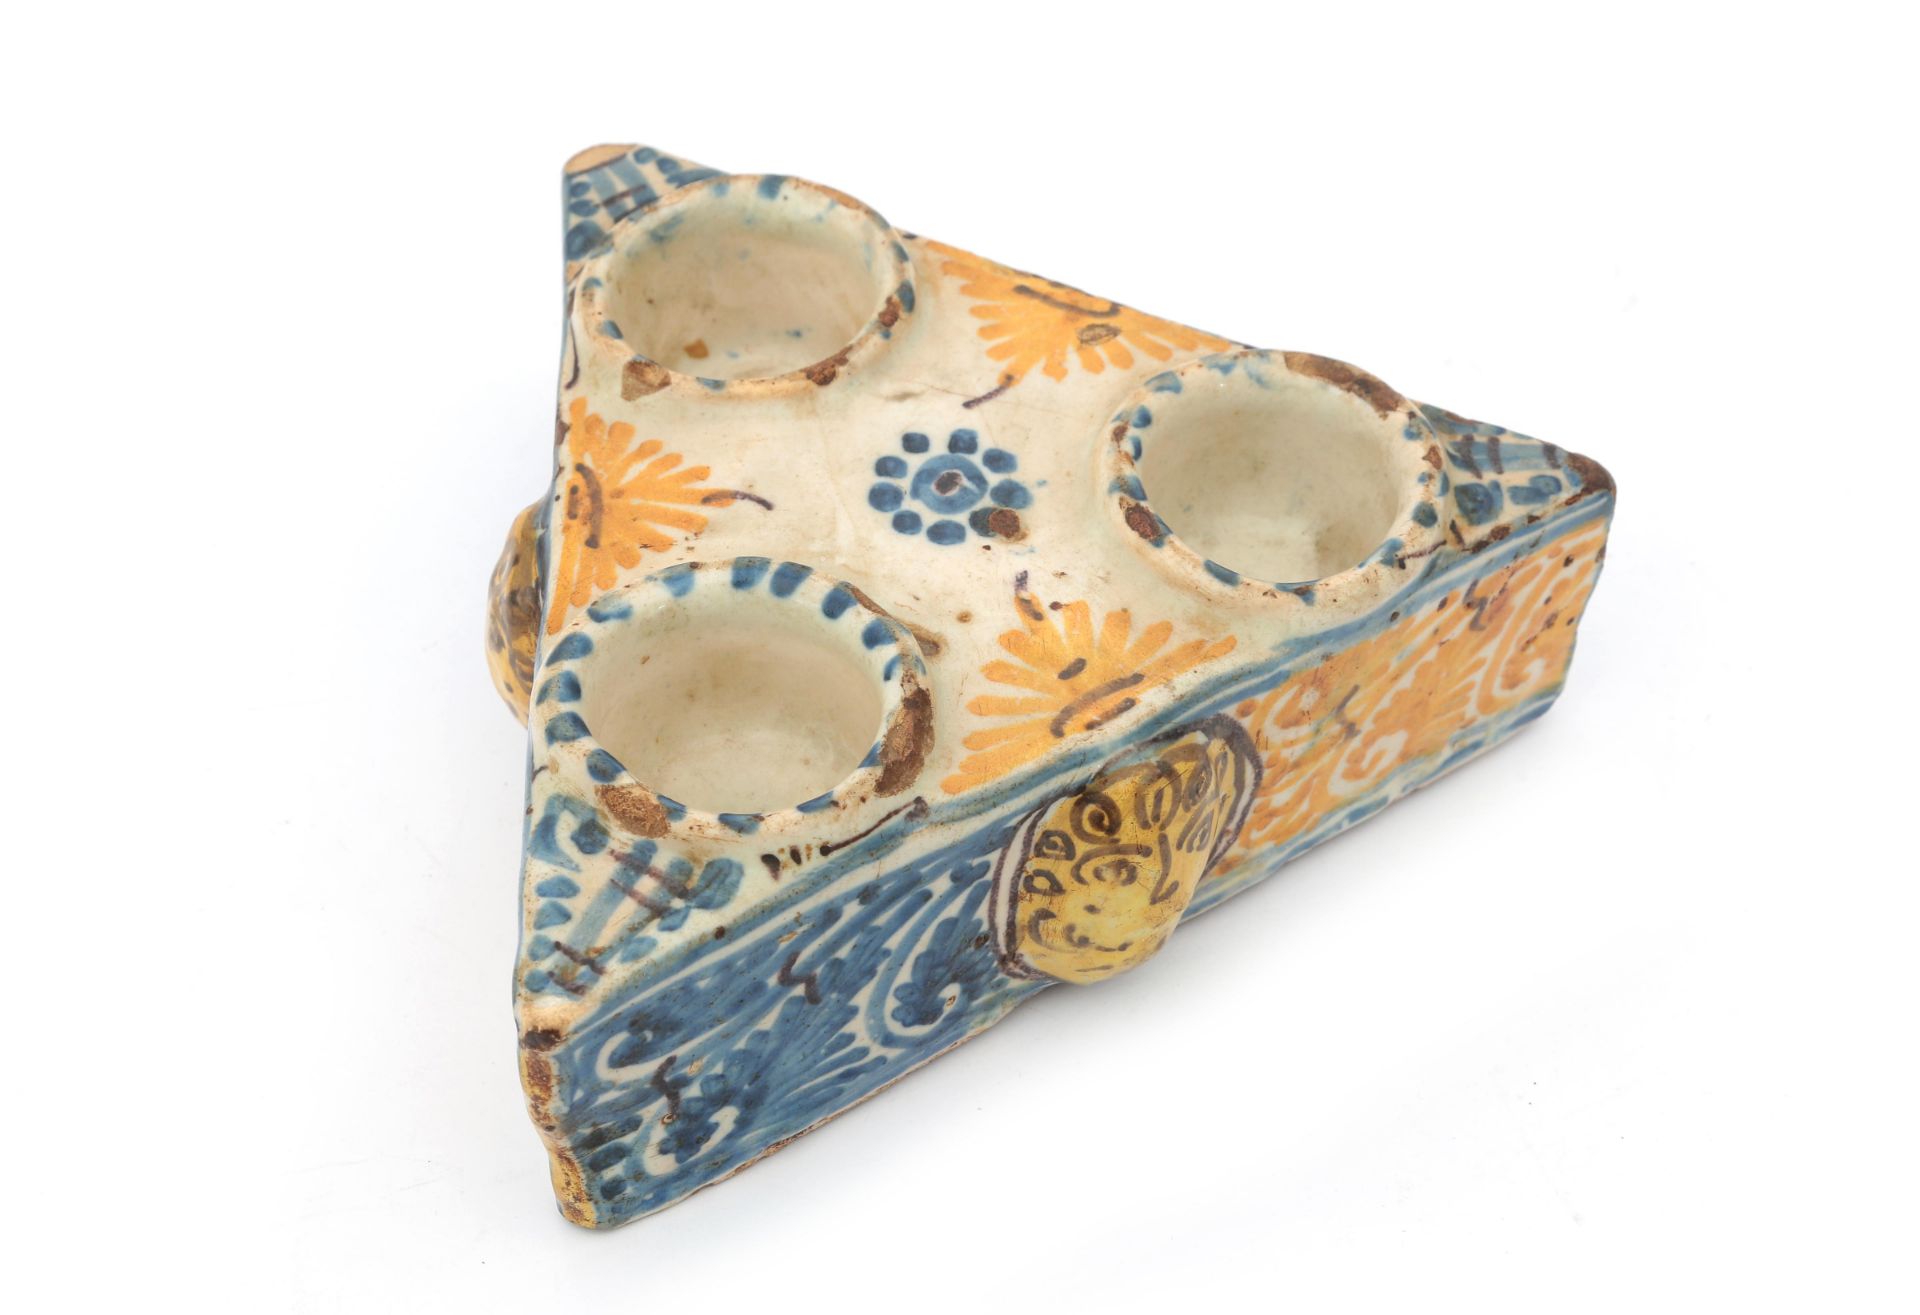 A Talavera majolica spice holder / salt cellar with decor in blue and yellow, adorned with